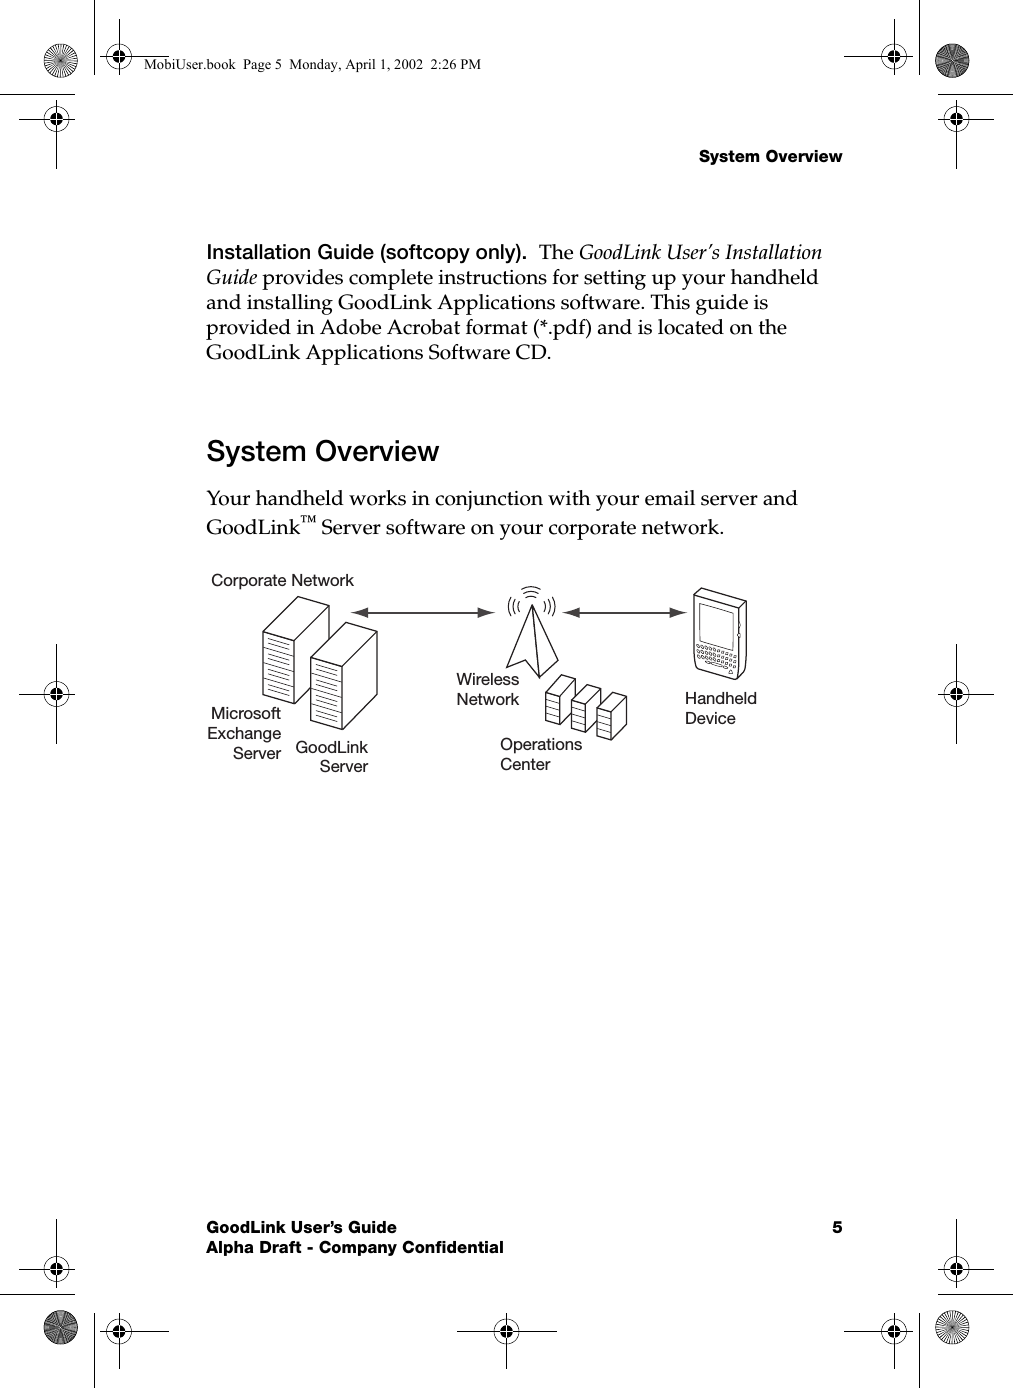 System OverviewGoodLink User’s Guide 5Alpha Draft - Company ConfidentialInstallation Guide (softcopy only).  The GoodLink User’s Installation Guide provides complete instructions for setting up your handheld and installing GoodLink Applications software. This guide is provided in Adobe Acrobat format (*.pdf) and is located on the GoodLink Applications Software CD.System OverviewYour handheld works in conjunction with your email server and GoodLink™ Server software on your corporate network. HandheldDeviceWirelessNetworkOperationsCenterMicrosoftExchangeServer GoodLinkServerCorporate NetworkMobiUser.book  Page 5  Monday, April 1, 2002  2:26 PM